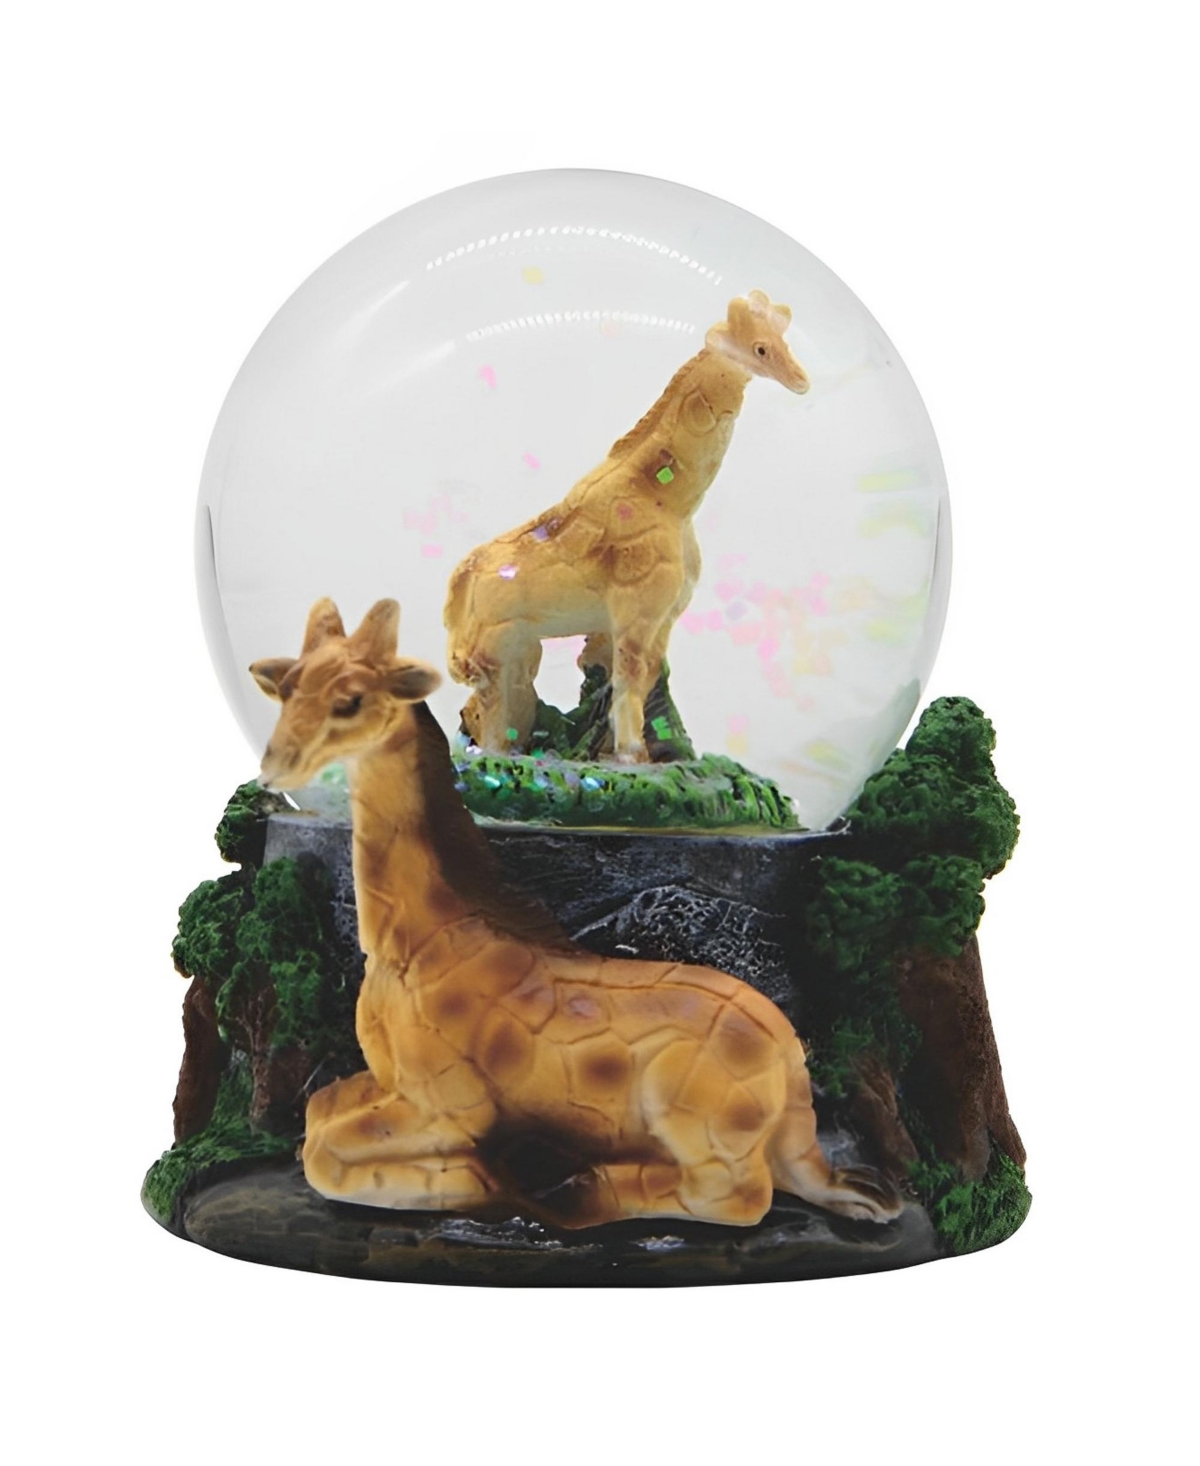 3.5"H Giraffe Glitter Snow Globe Figurine Home Decor Perfect Gift for House Warming, Holidays and Birthdays - Multicolor